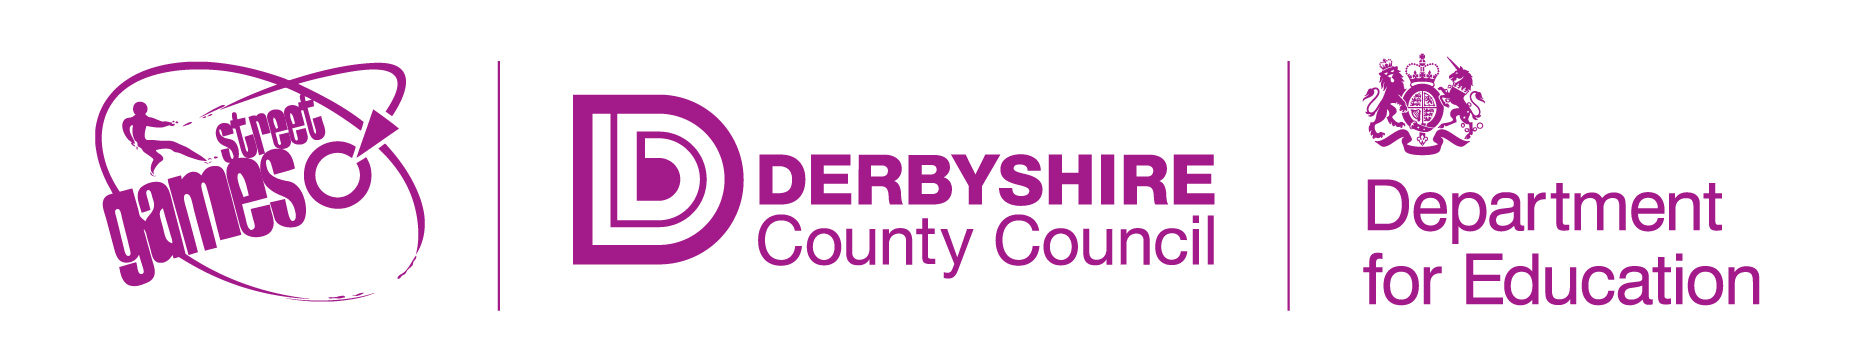 StreetGames UK, Derbyshire County Council and Department for Education logos